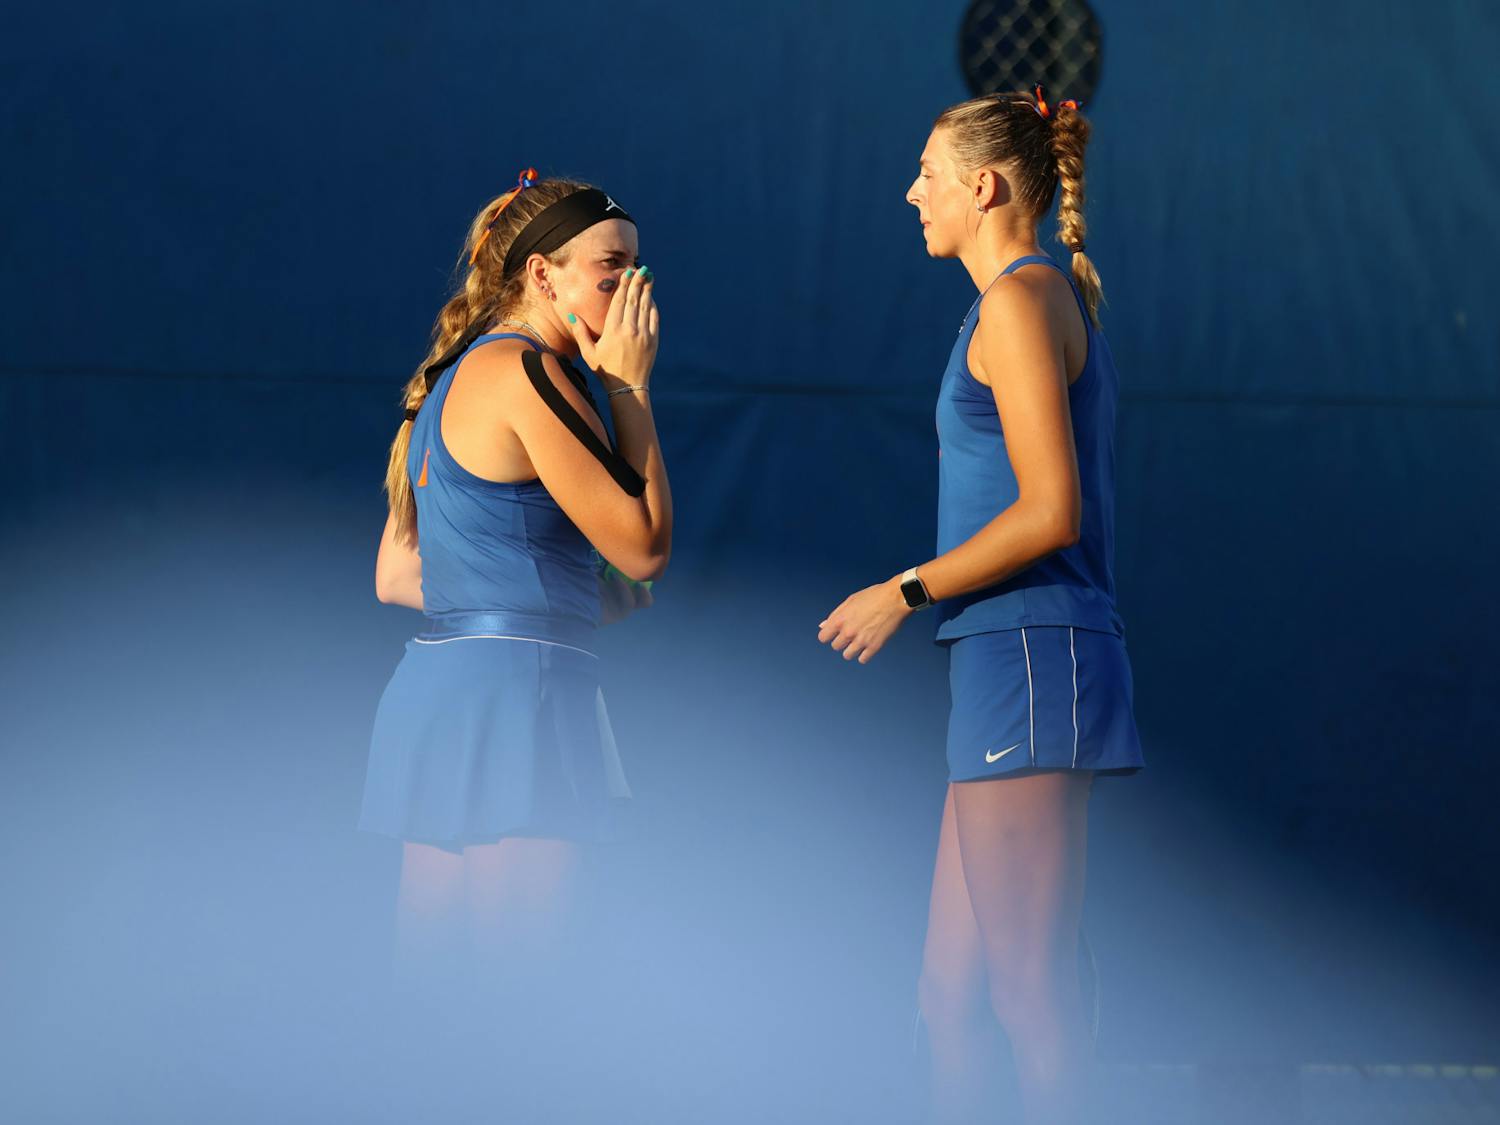 Florida senior Carly Briggs and sophomore Alicia Dudeney talk to each during their doubles match in the Gators' matchup against the Pepperdine Waves Friday, Feb 24, 2023.